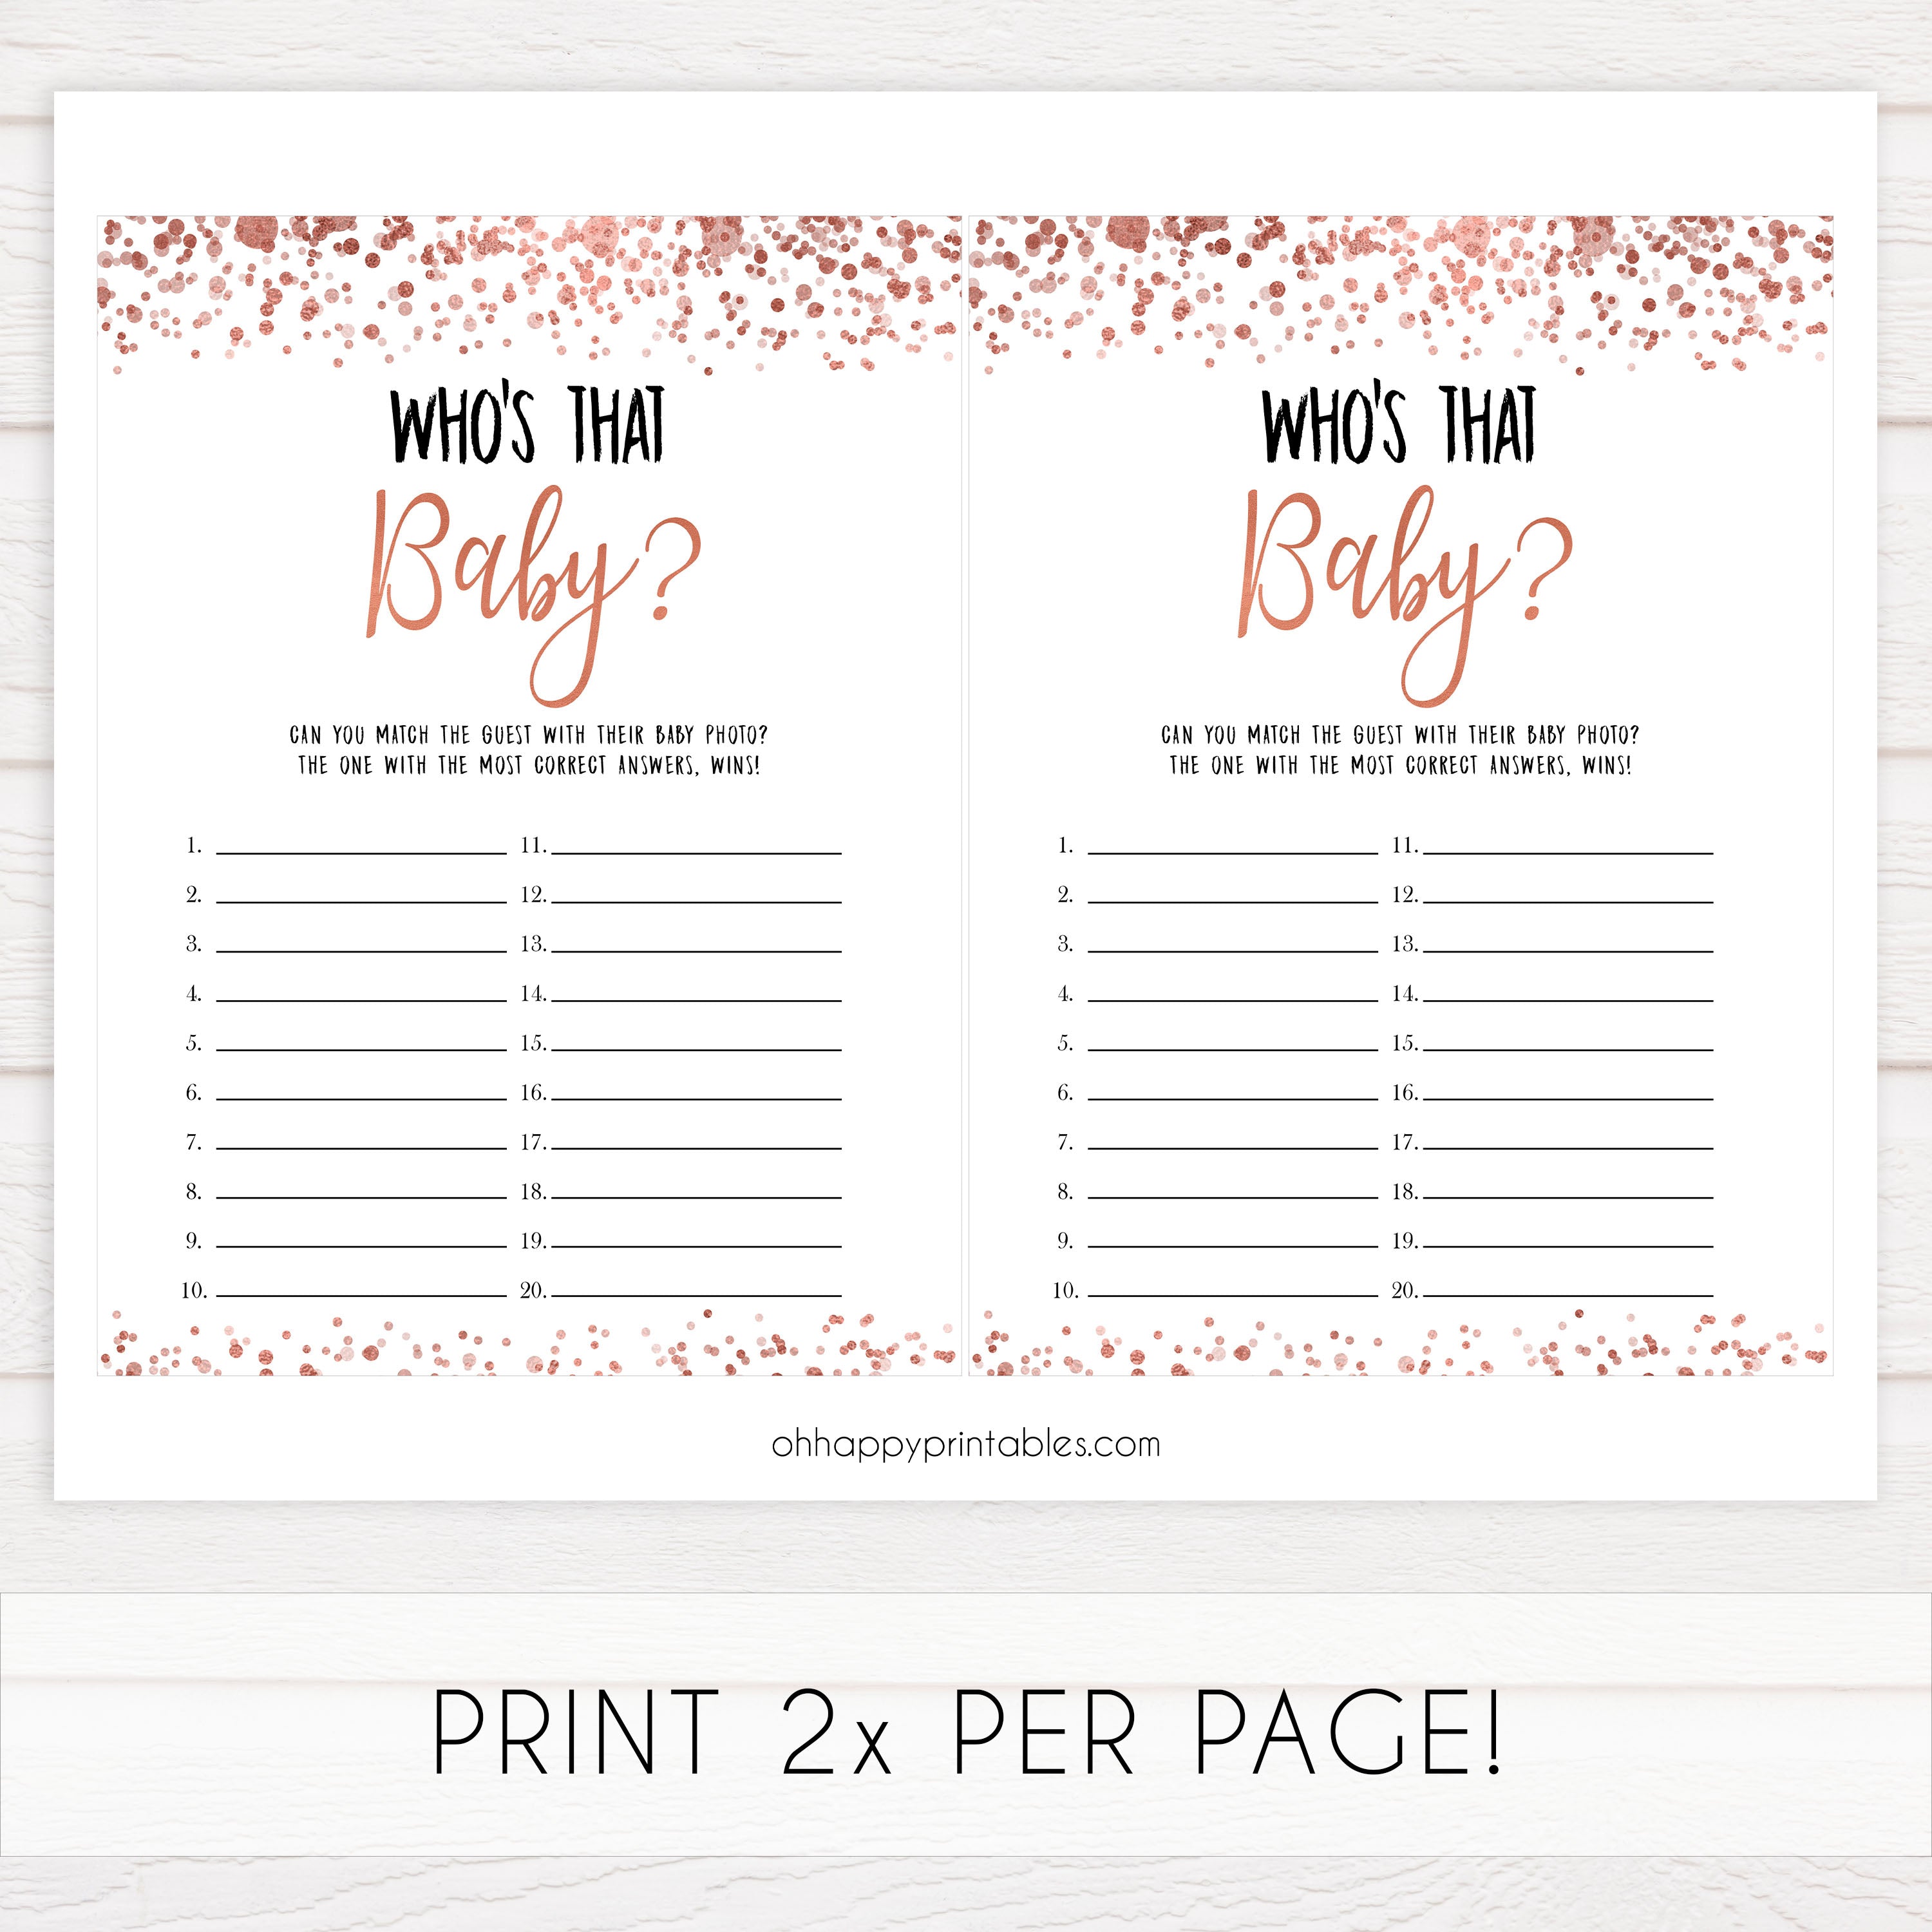 whos that baby game, guess the baby game, Printable baby shower games, rose gold fun baby games, baby shower games, fun baby shower ideas, top baby shower ideas, blush baby shower, rose gold baby shower ideas